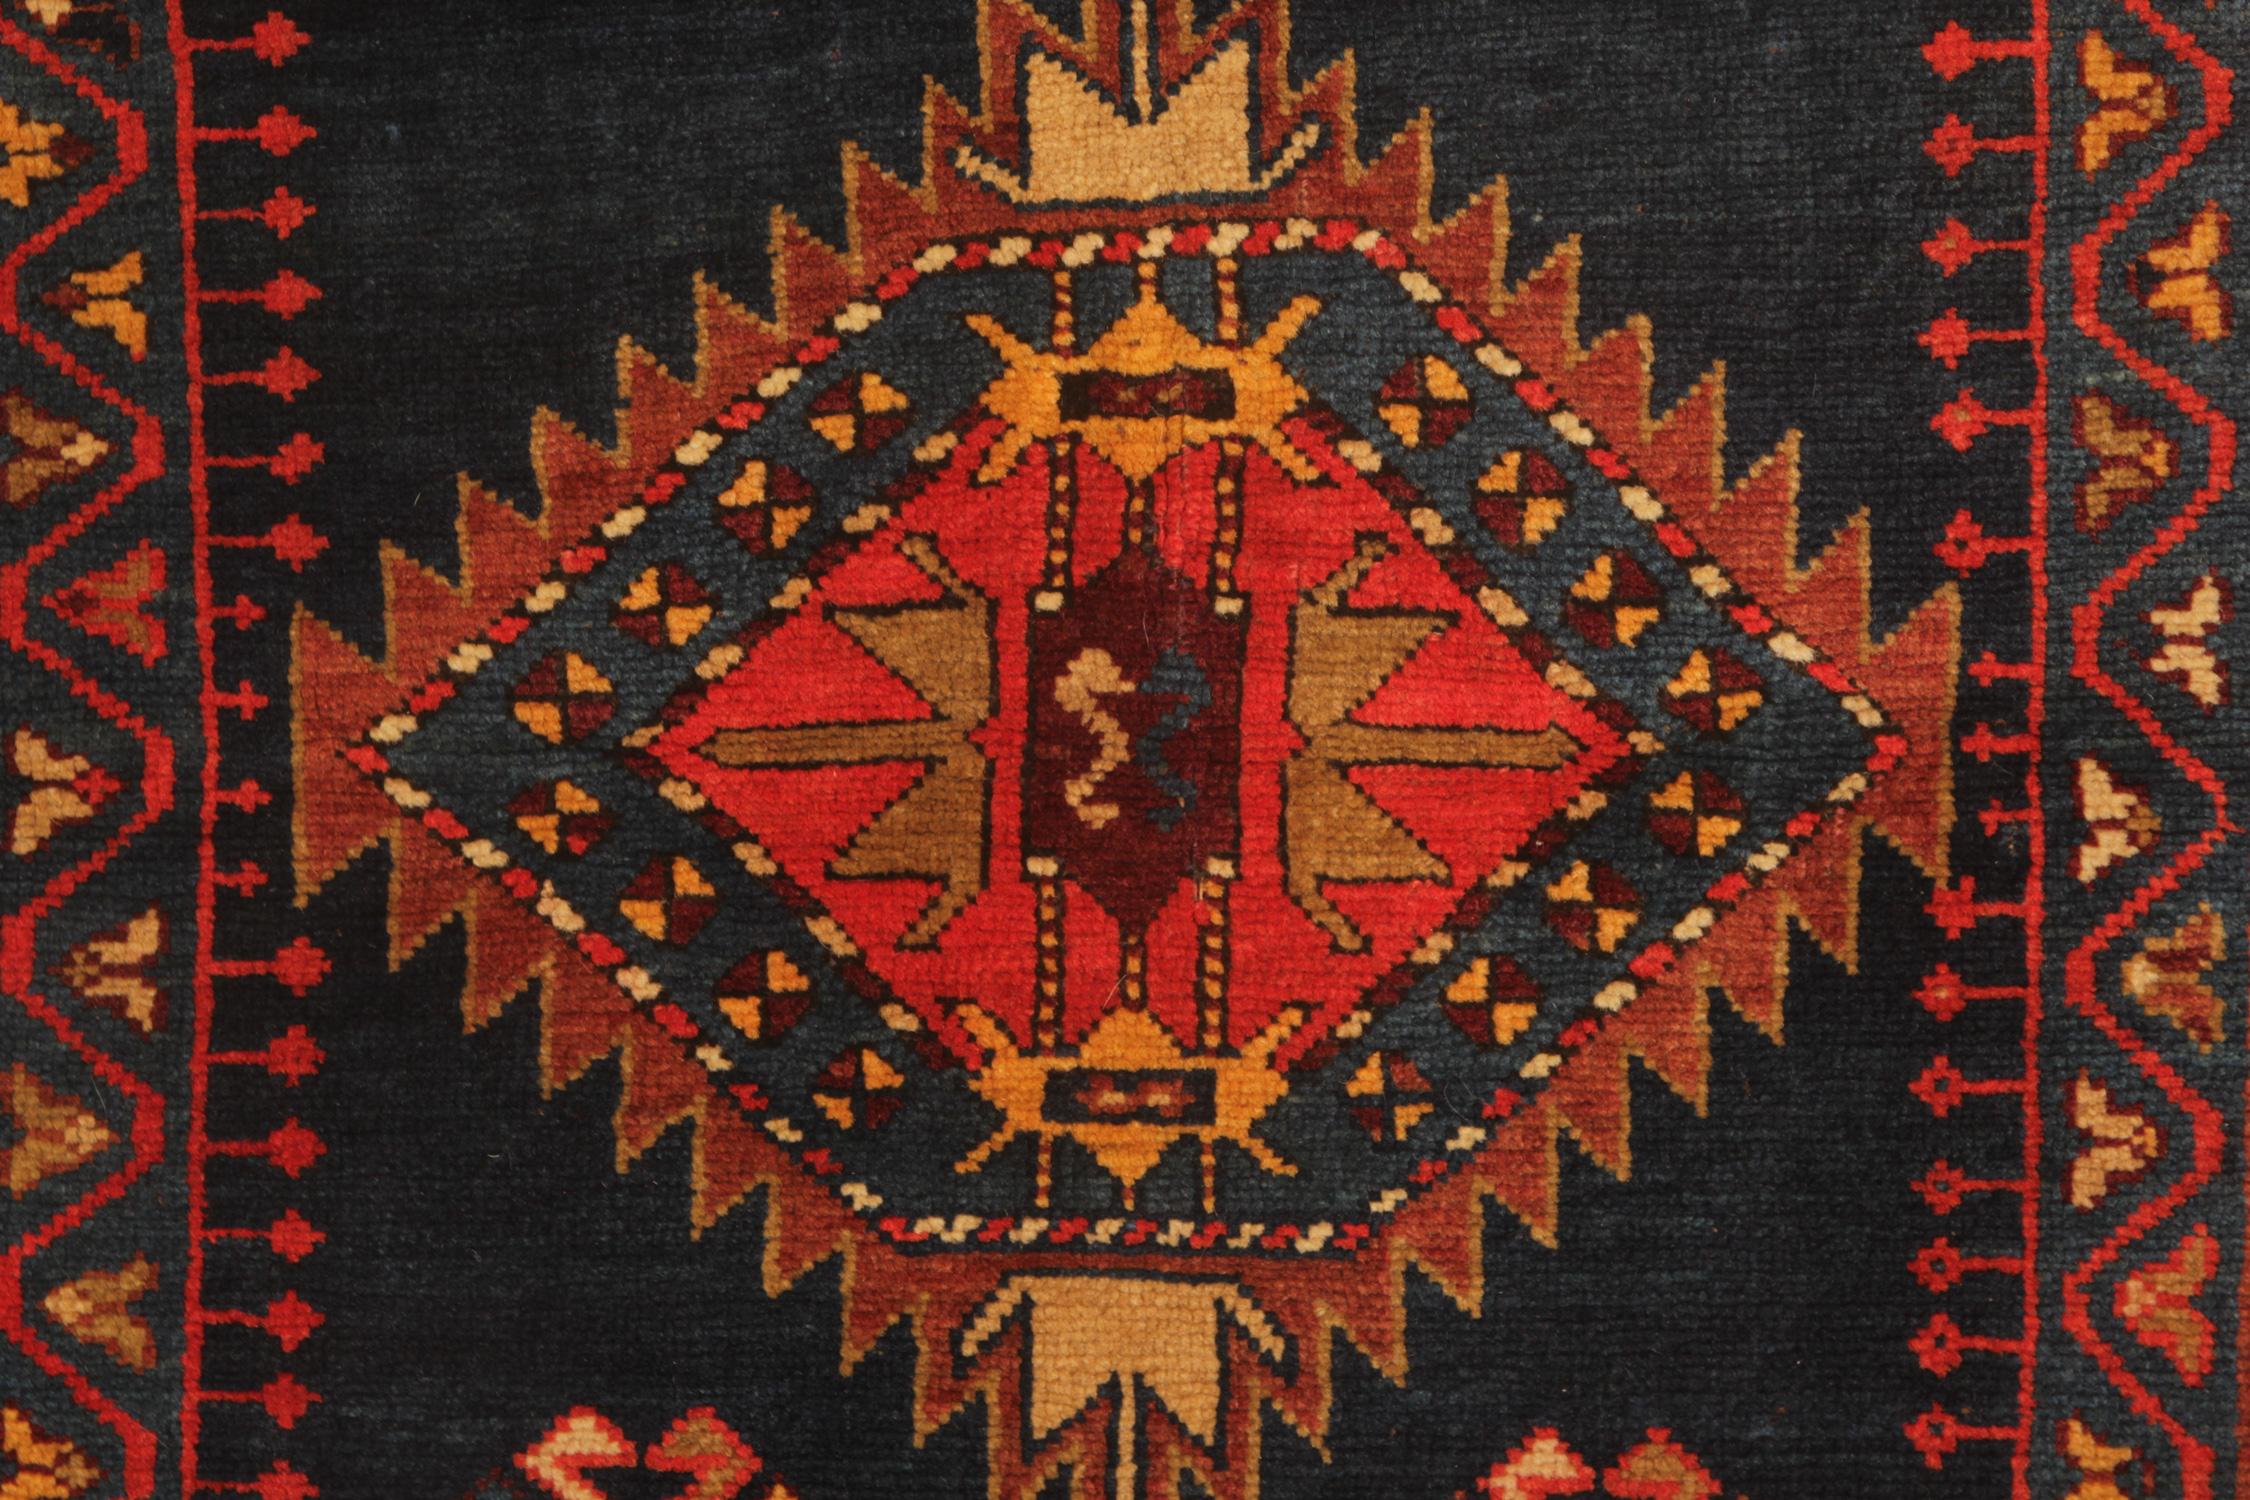 An excellent example of traditional Caucasian handmade carpet Oriental rug weaving from the Kazak region. These Medallion ground design patterned rugs can be the best element of home decor objects to give warmth to the environment because this woven